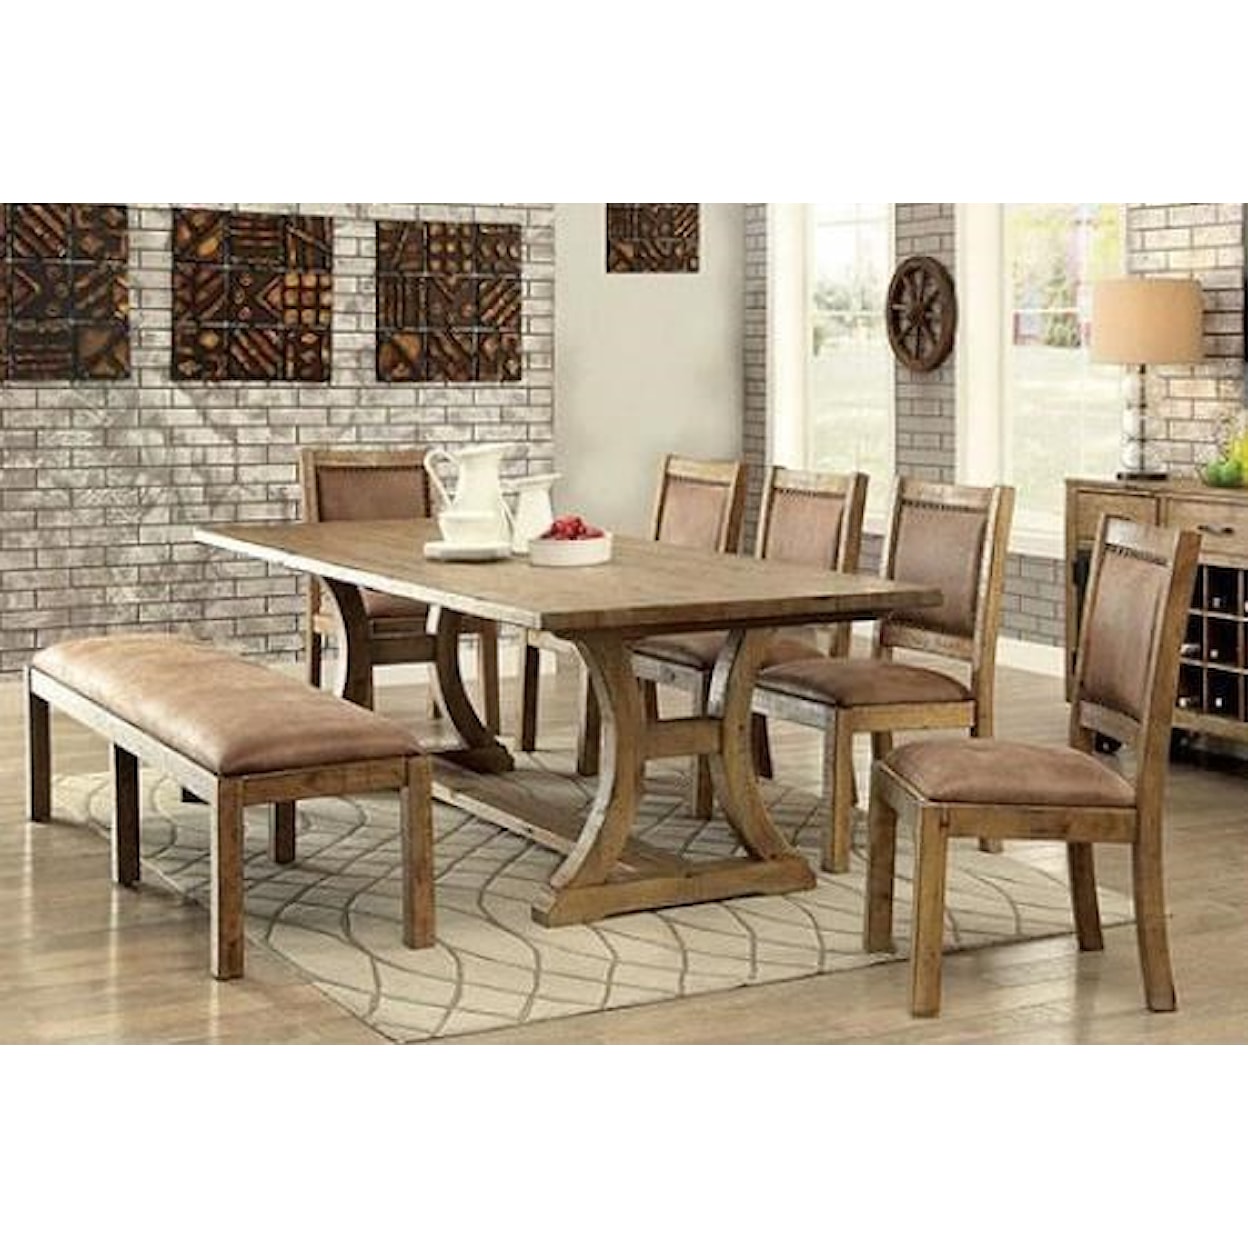 FUSA Gianna Table, 4 Chairs, and Upholstered Bench